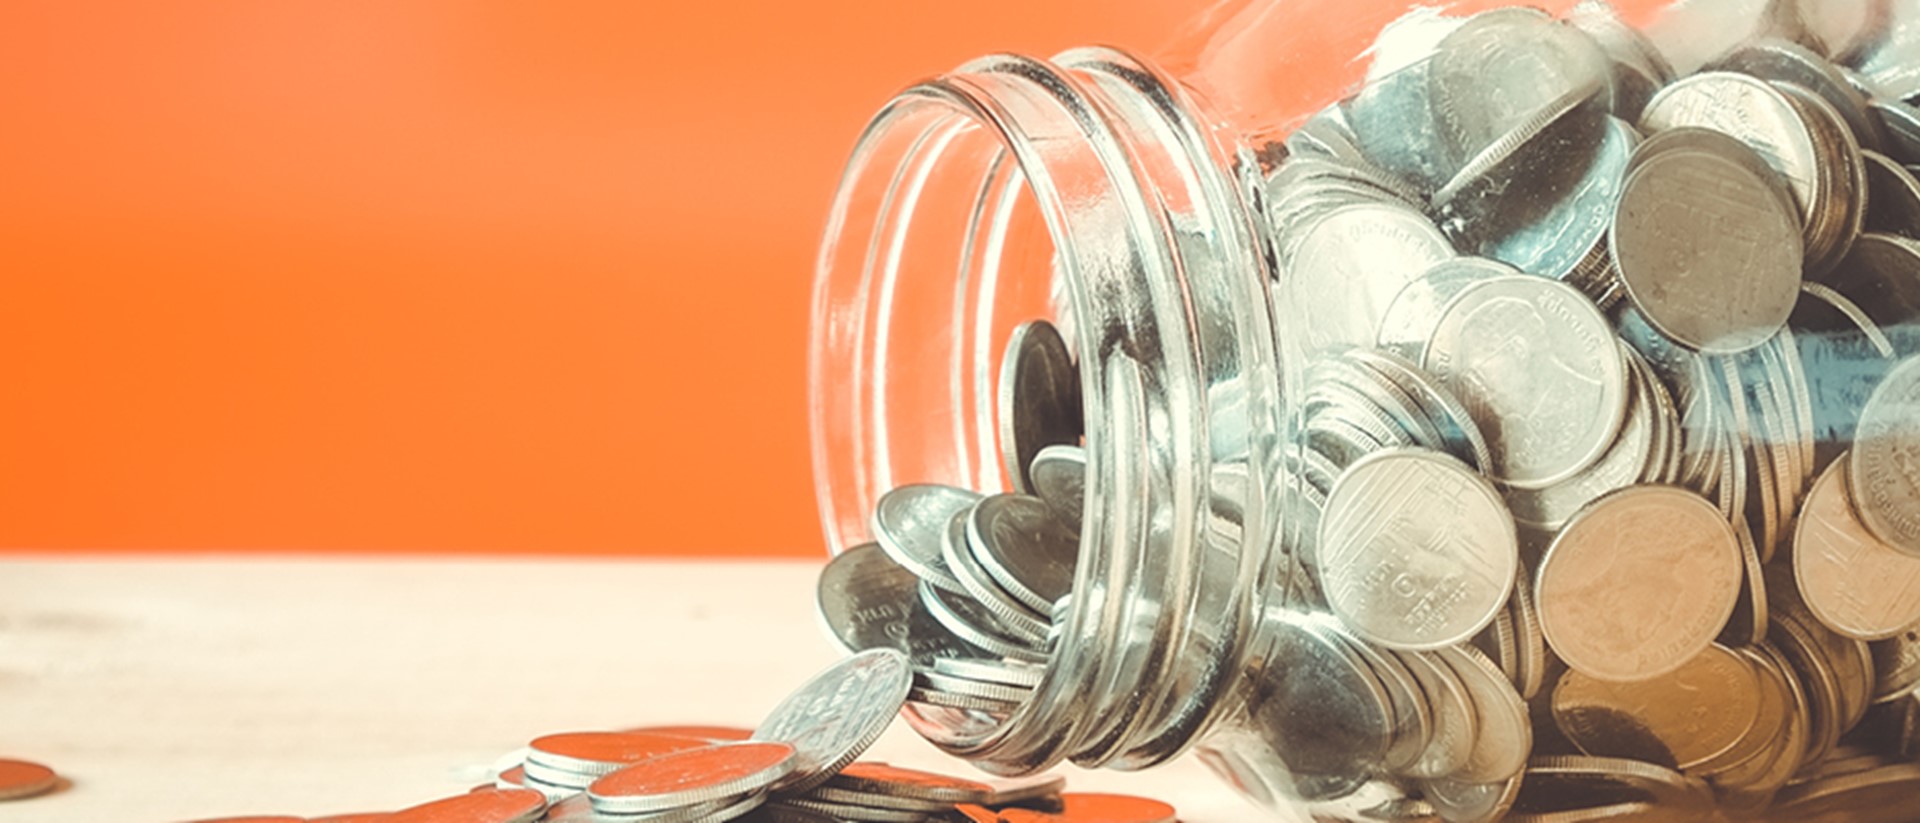 Image of coins flowing our of a glass jar on it's side on an orange background